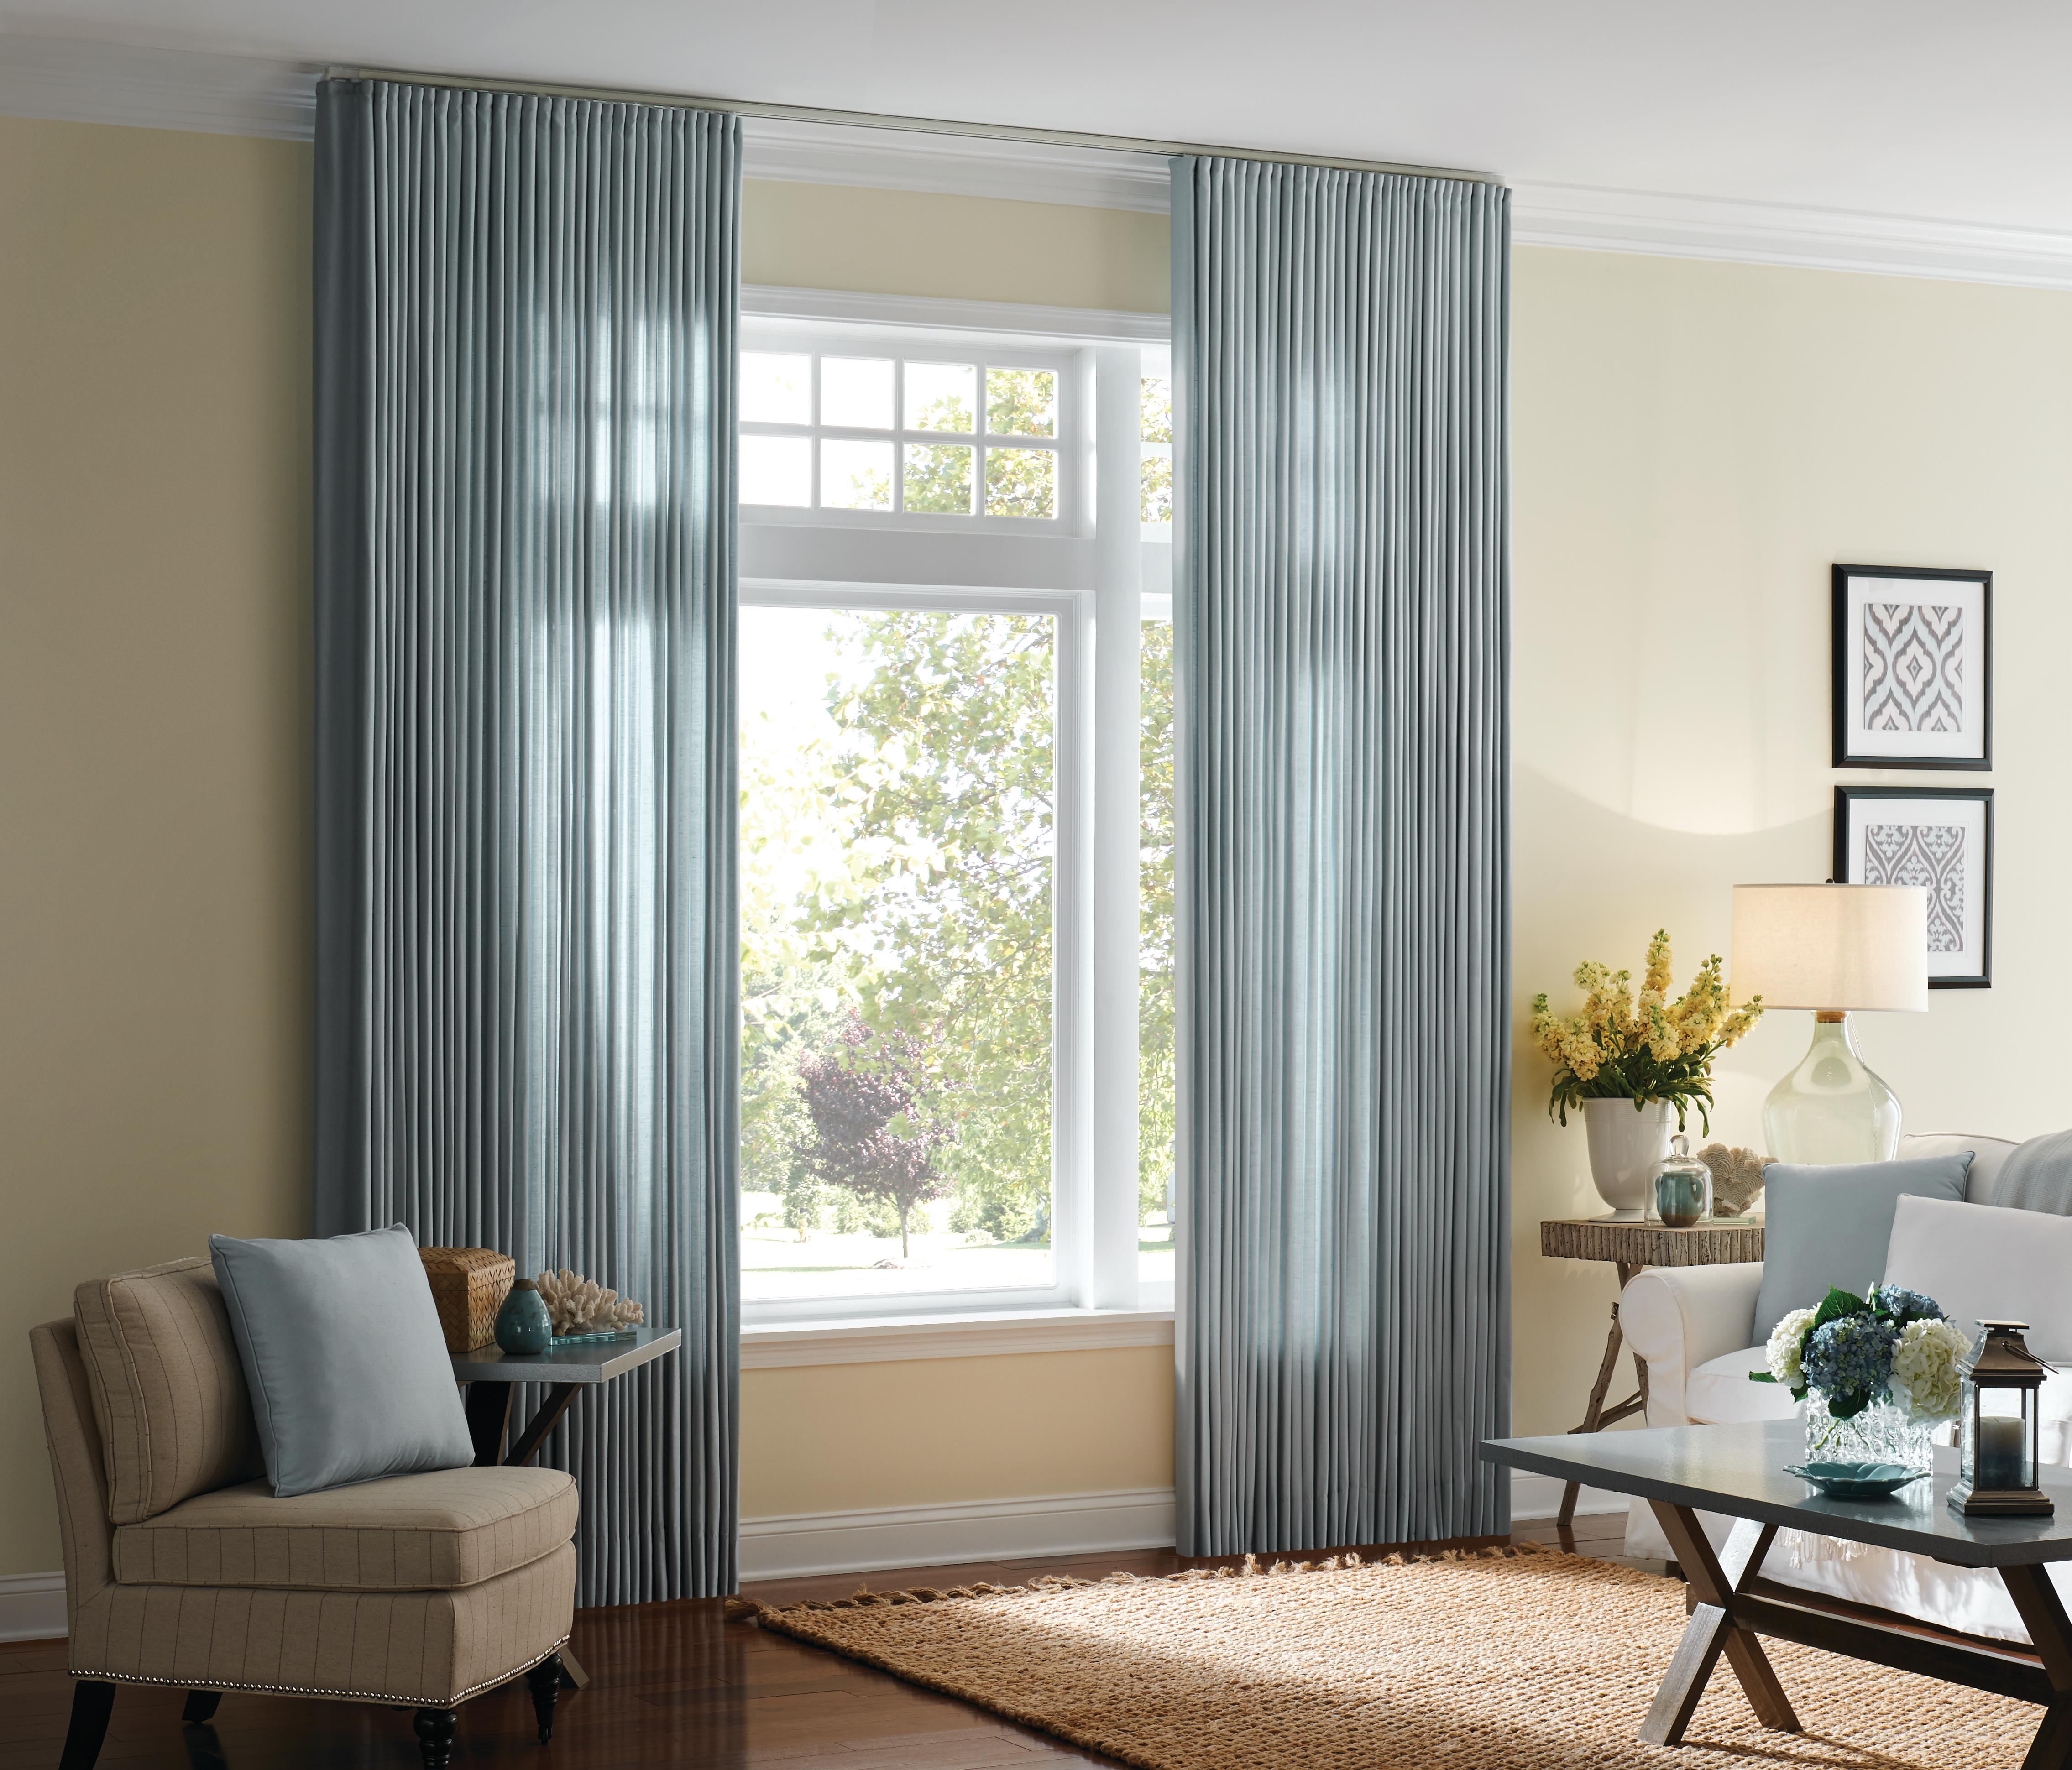 Budget Blinds of Waterloo in Waterloo: #draperypanels are available in a variety of fashionable fabrics with varying opacities for creating softer natural light.